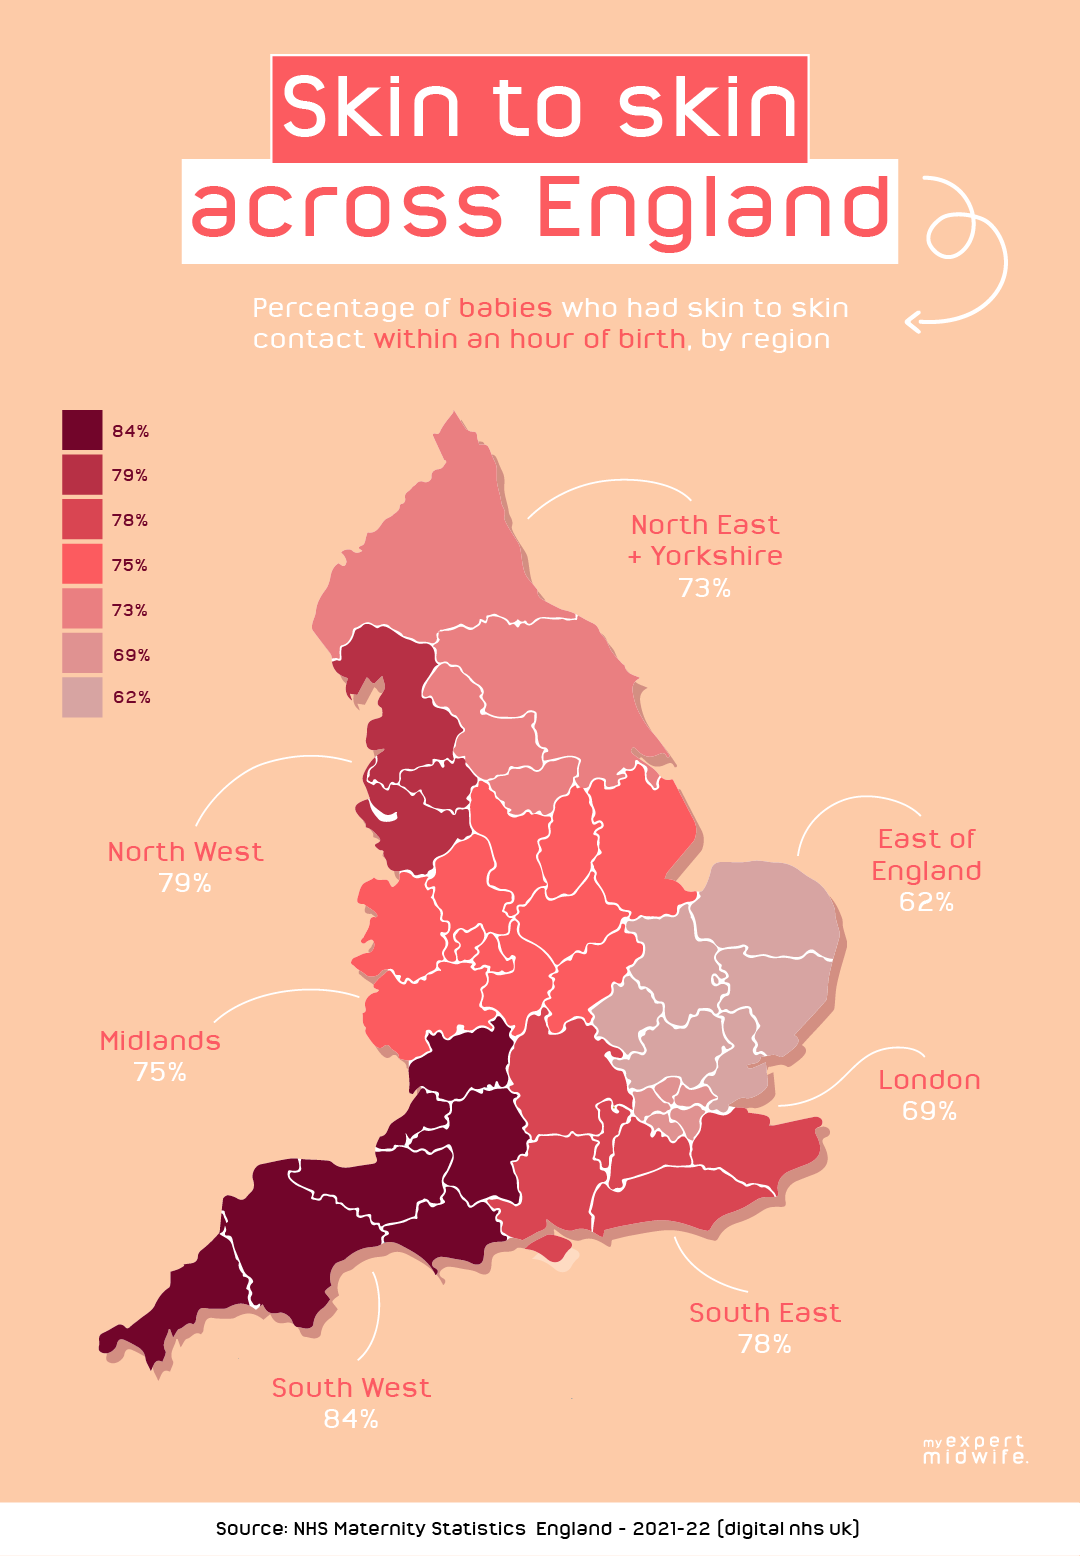 percentage of babies across England who had skin to skin contact within an hour of birth